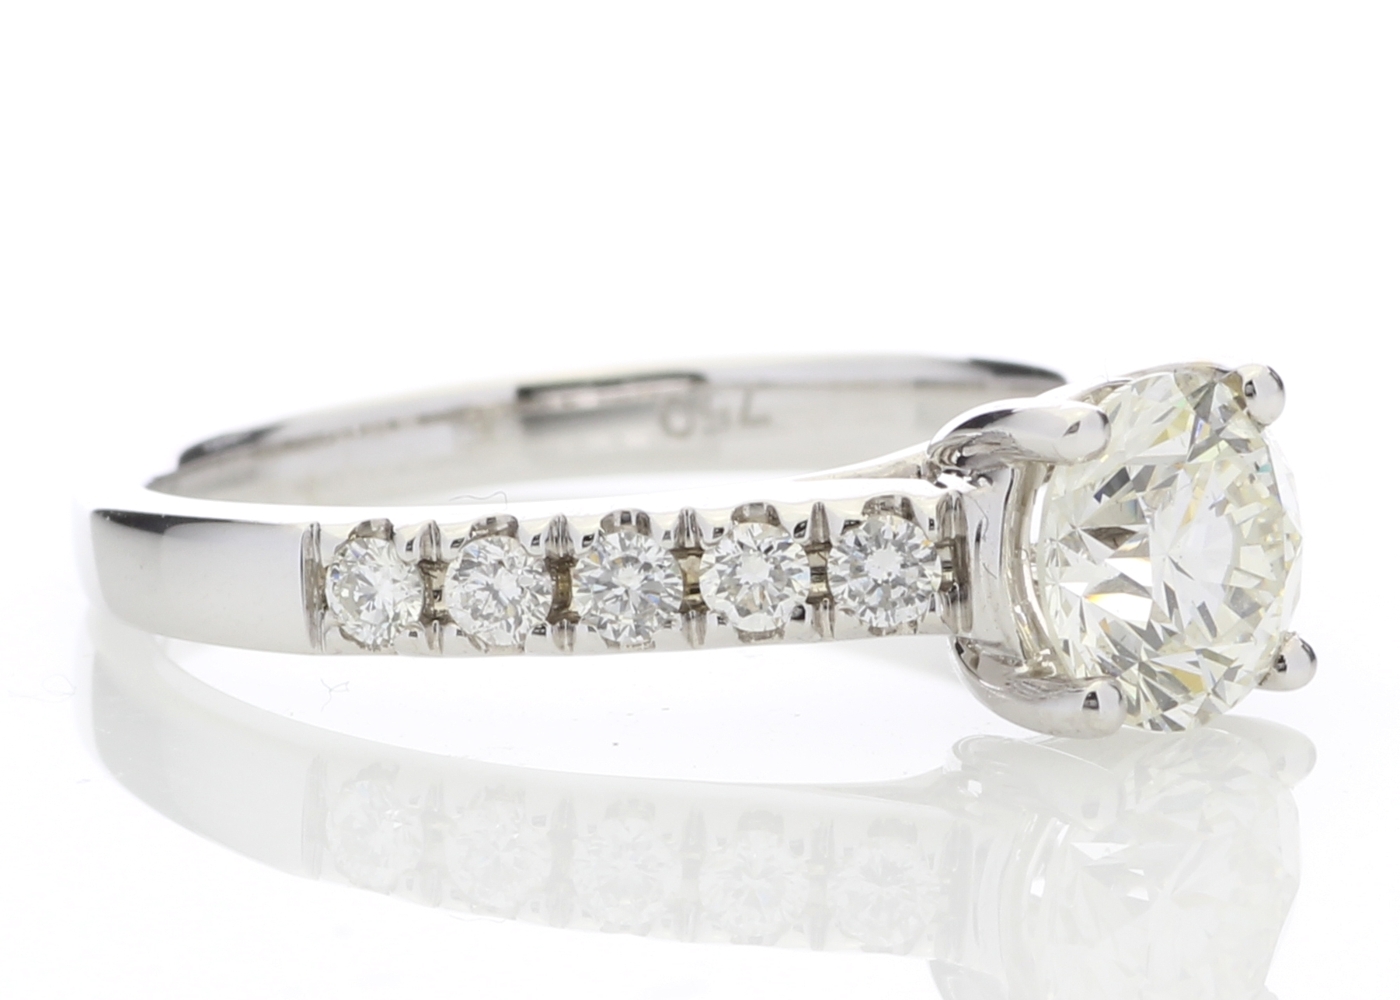 18ct White Gold Single Stone Diamond Ring With Stone Set Shoulders (1.02) 1.32 Carats - Image 4 of 5